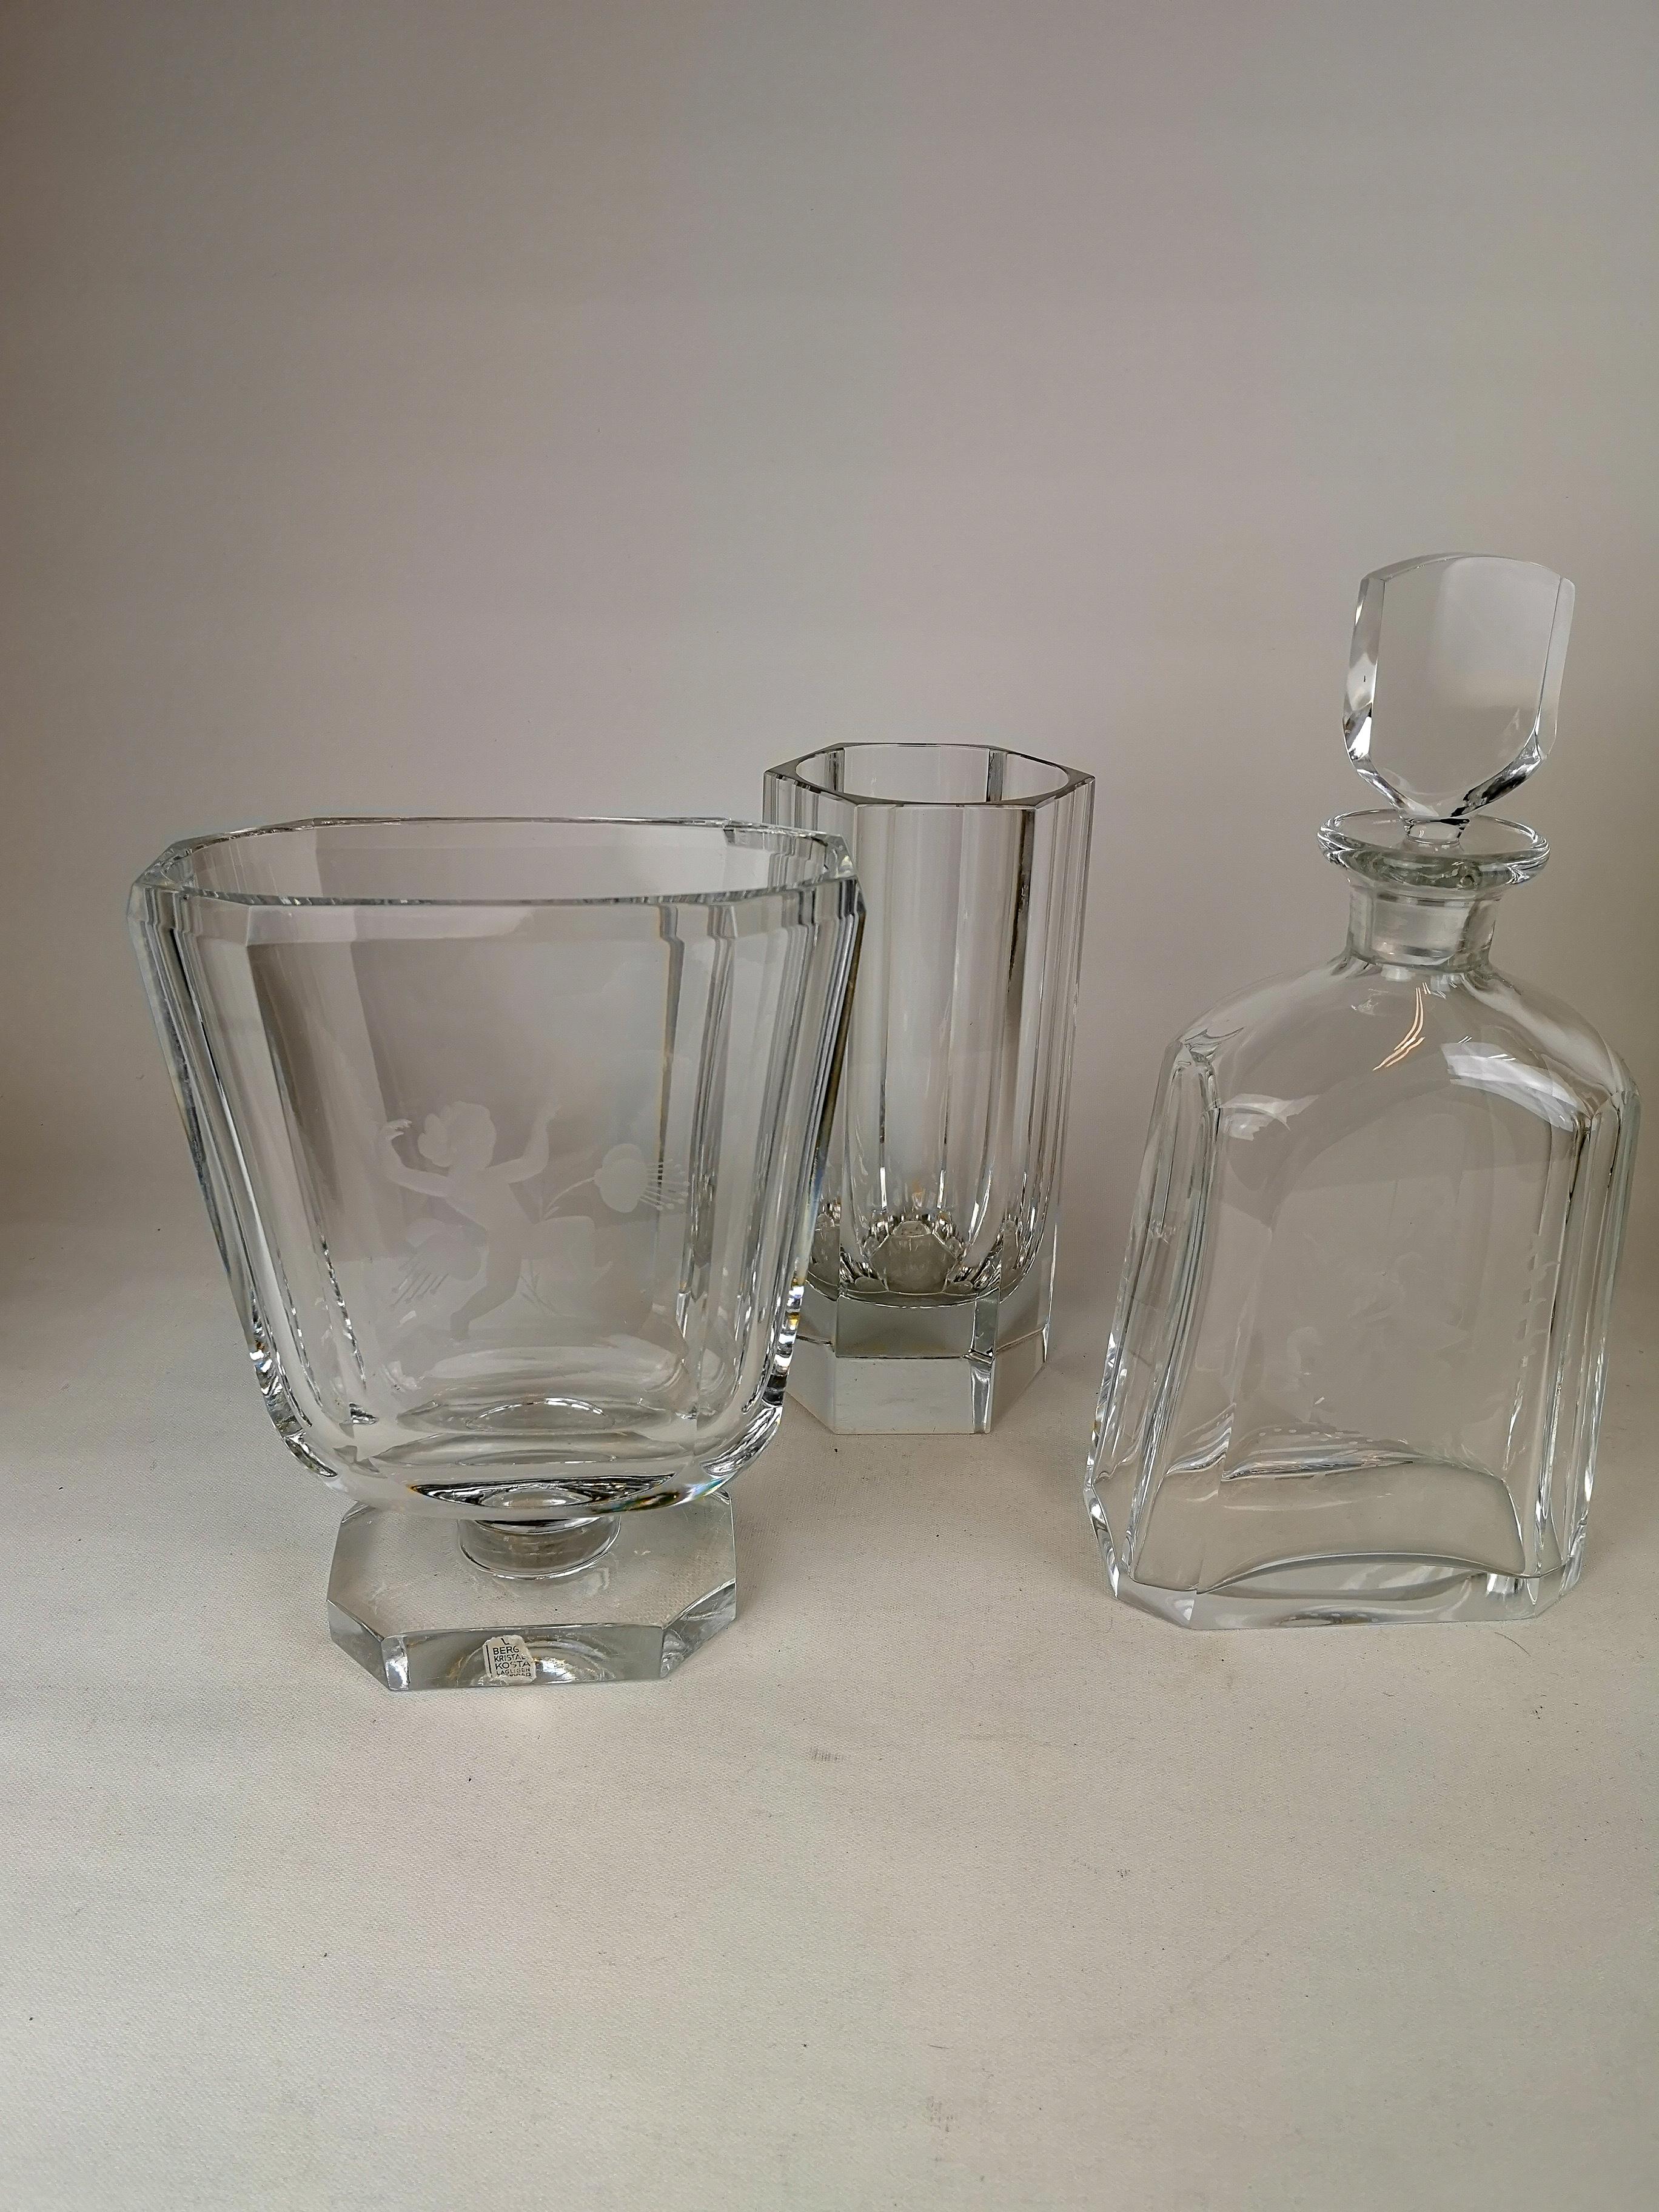 Nice set of 2 vases and one Carafe in Art Deco style. They are all made in Sweden at Kosta and designed by Elis Bergh.
They are nicely finished in the glass and the carafe and one of the vases have nicely pattern carved in to the pieces. 

Good